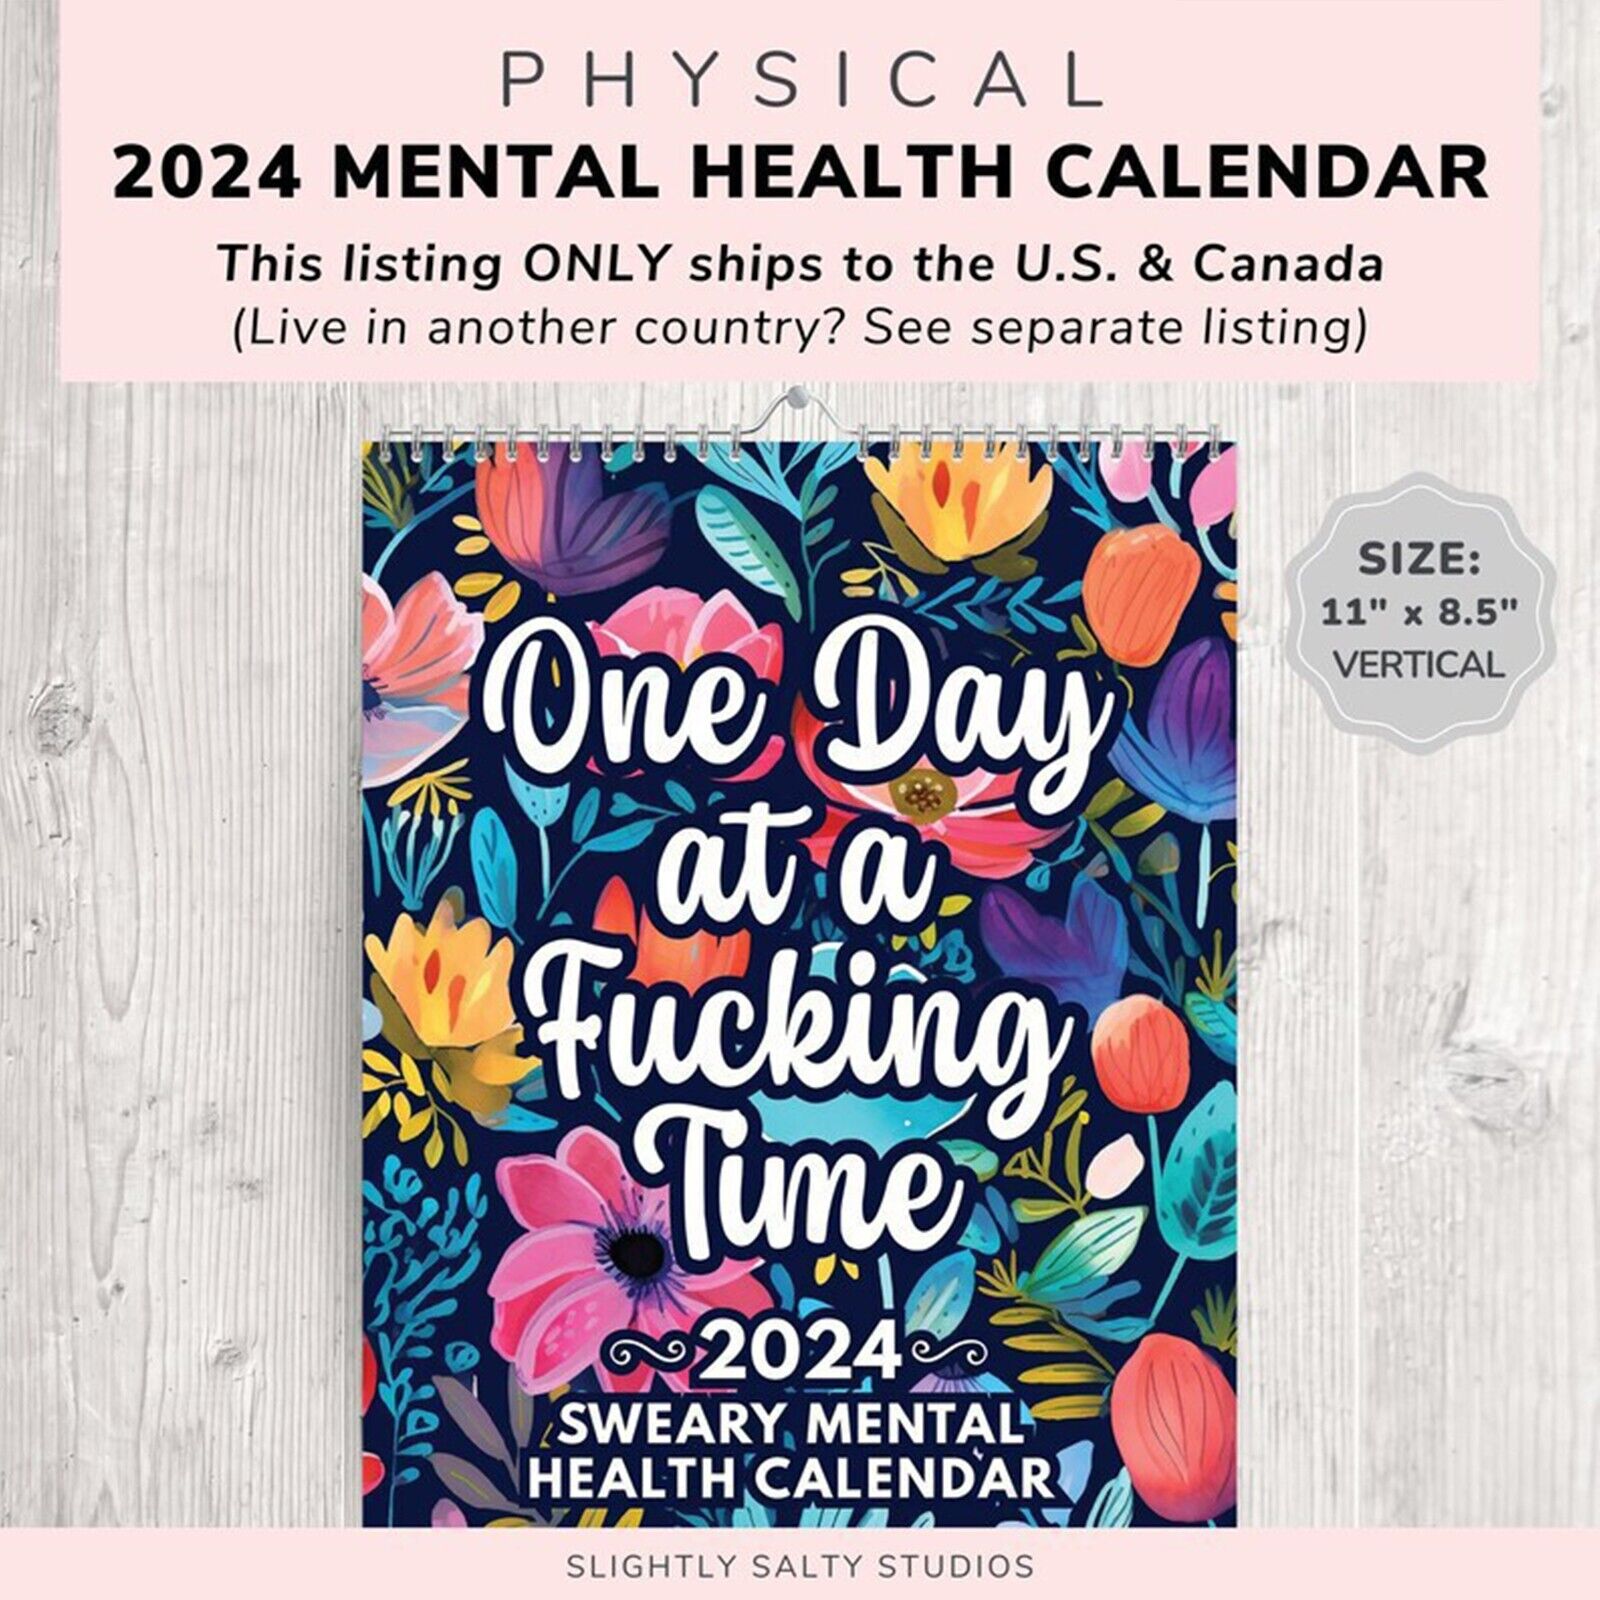 2024 Funny Mental Health Calendar, One Day at a F*cking Time Calendar Funny Gift